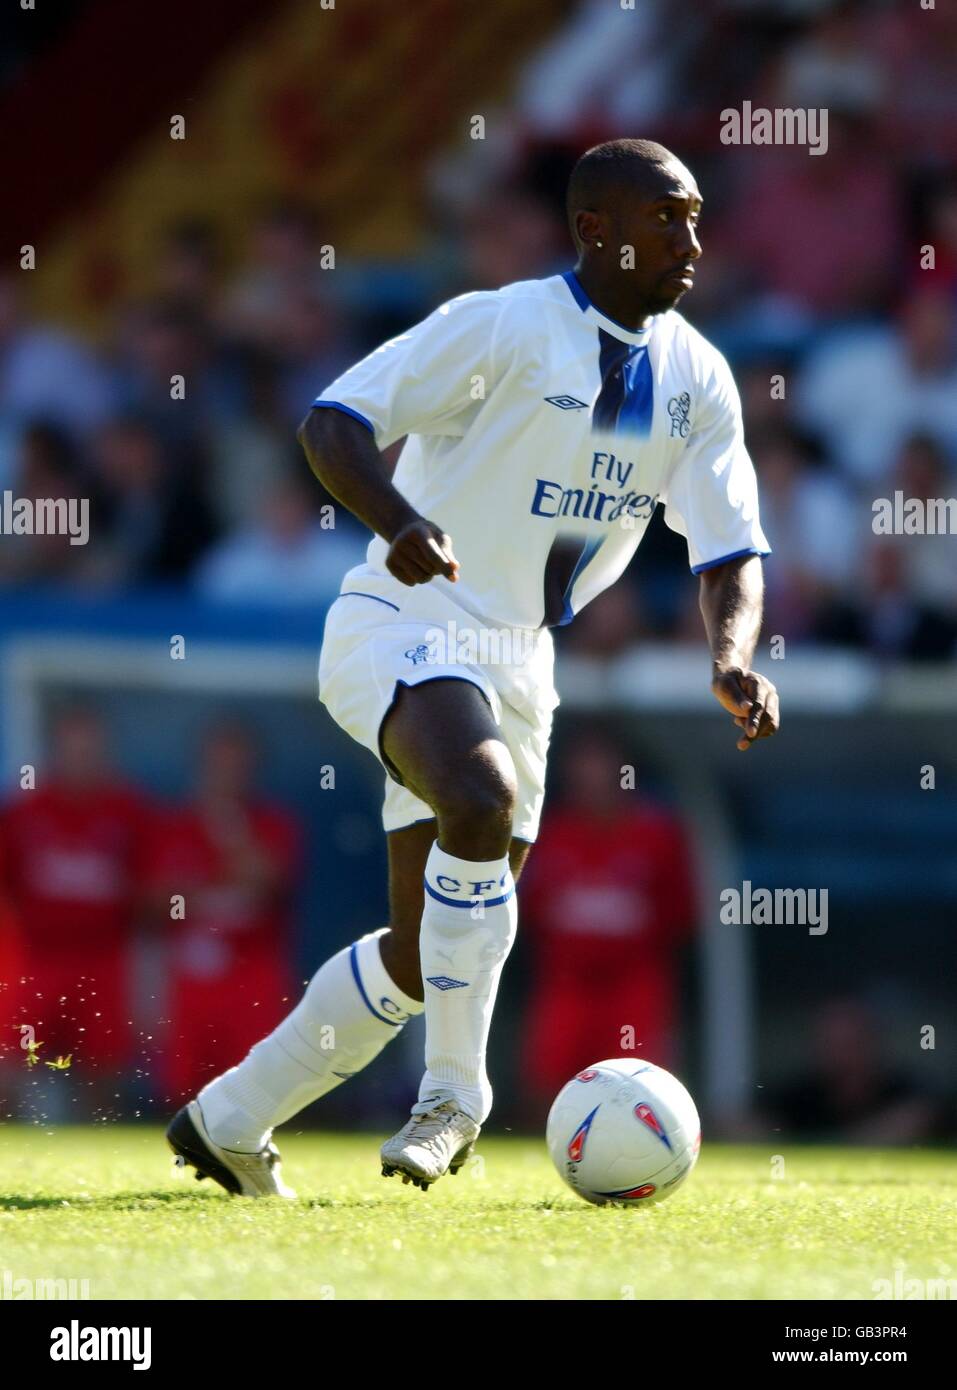 Soccer - Friendly - Crystal Palace v Chelsea. Jimmy Floyd Hasselbaink of Chelsea Stock Photo